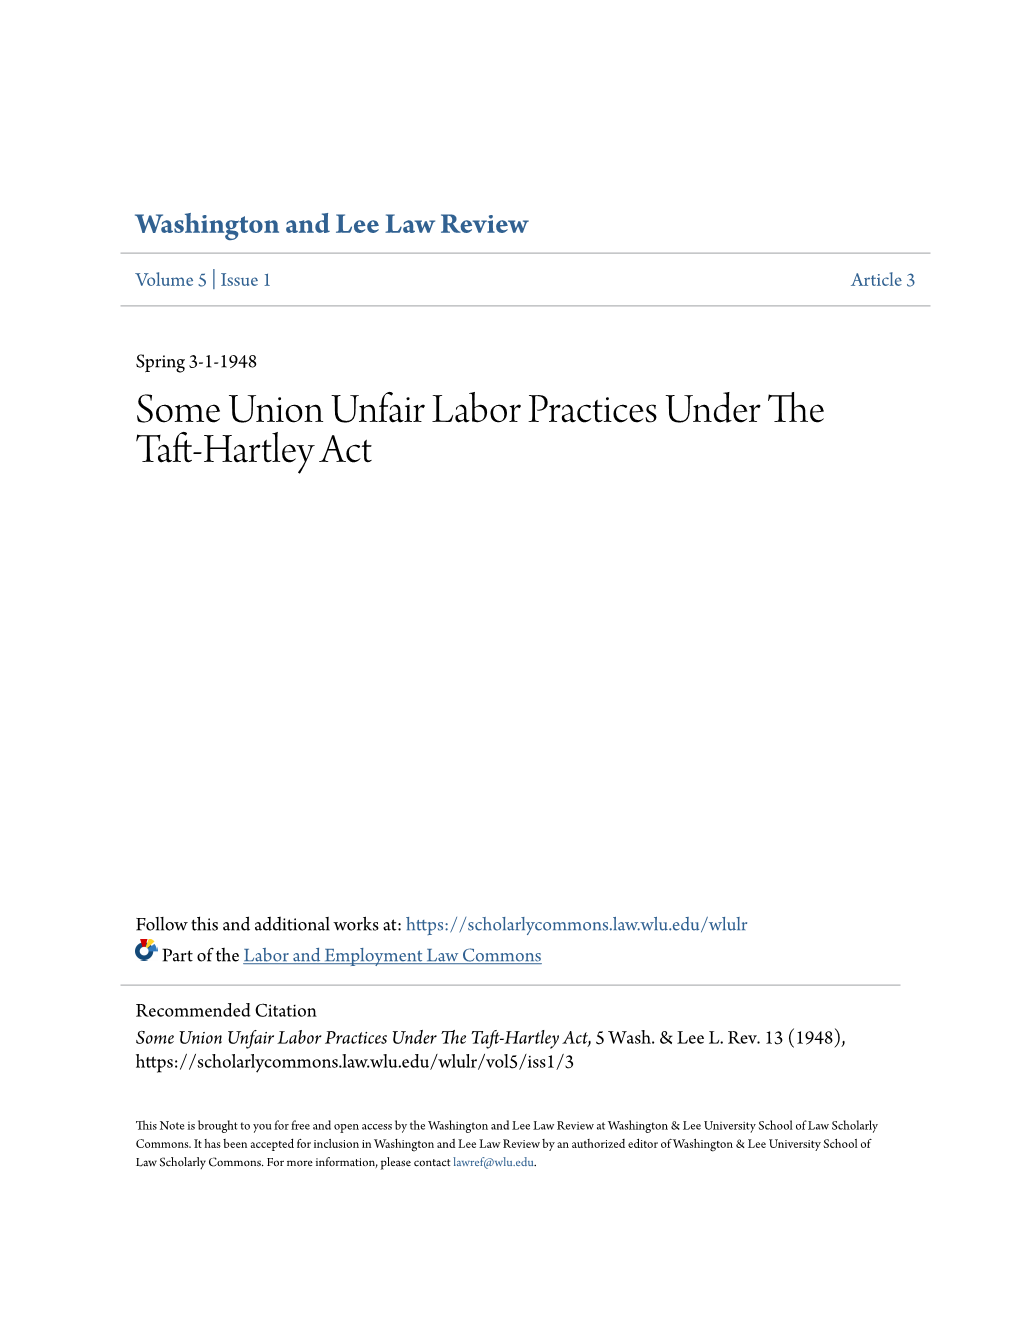 Some Union Unfair Labor Practices Under the Taft-Hartley Act